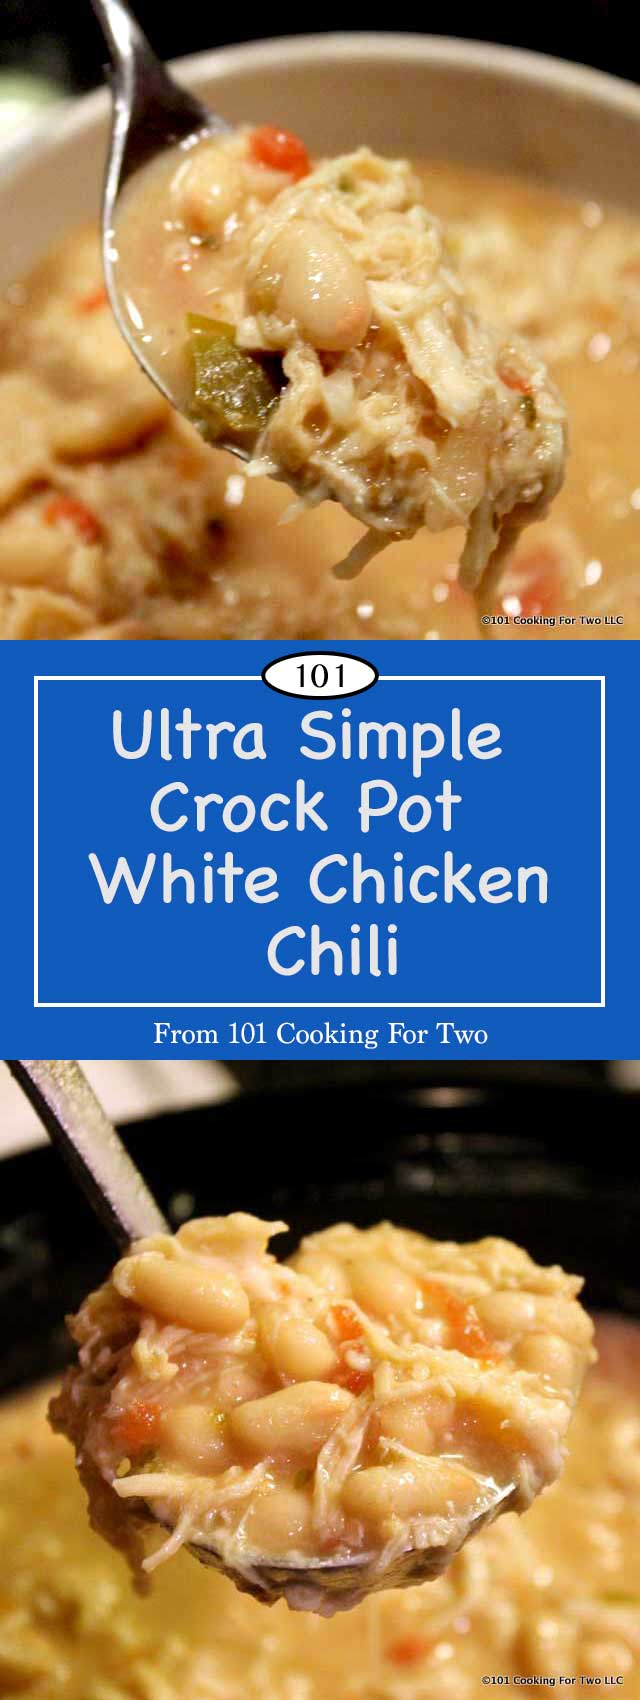 Ultra Simple Crock Pot White Chicken Chili | 101 Cooking For Two